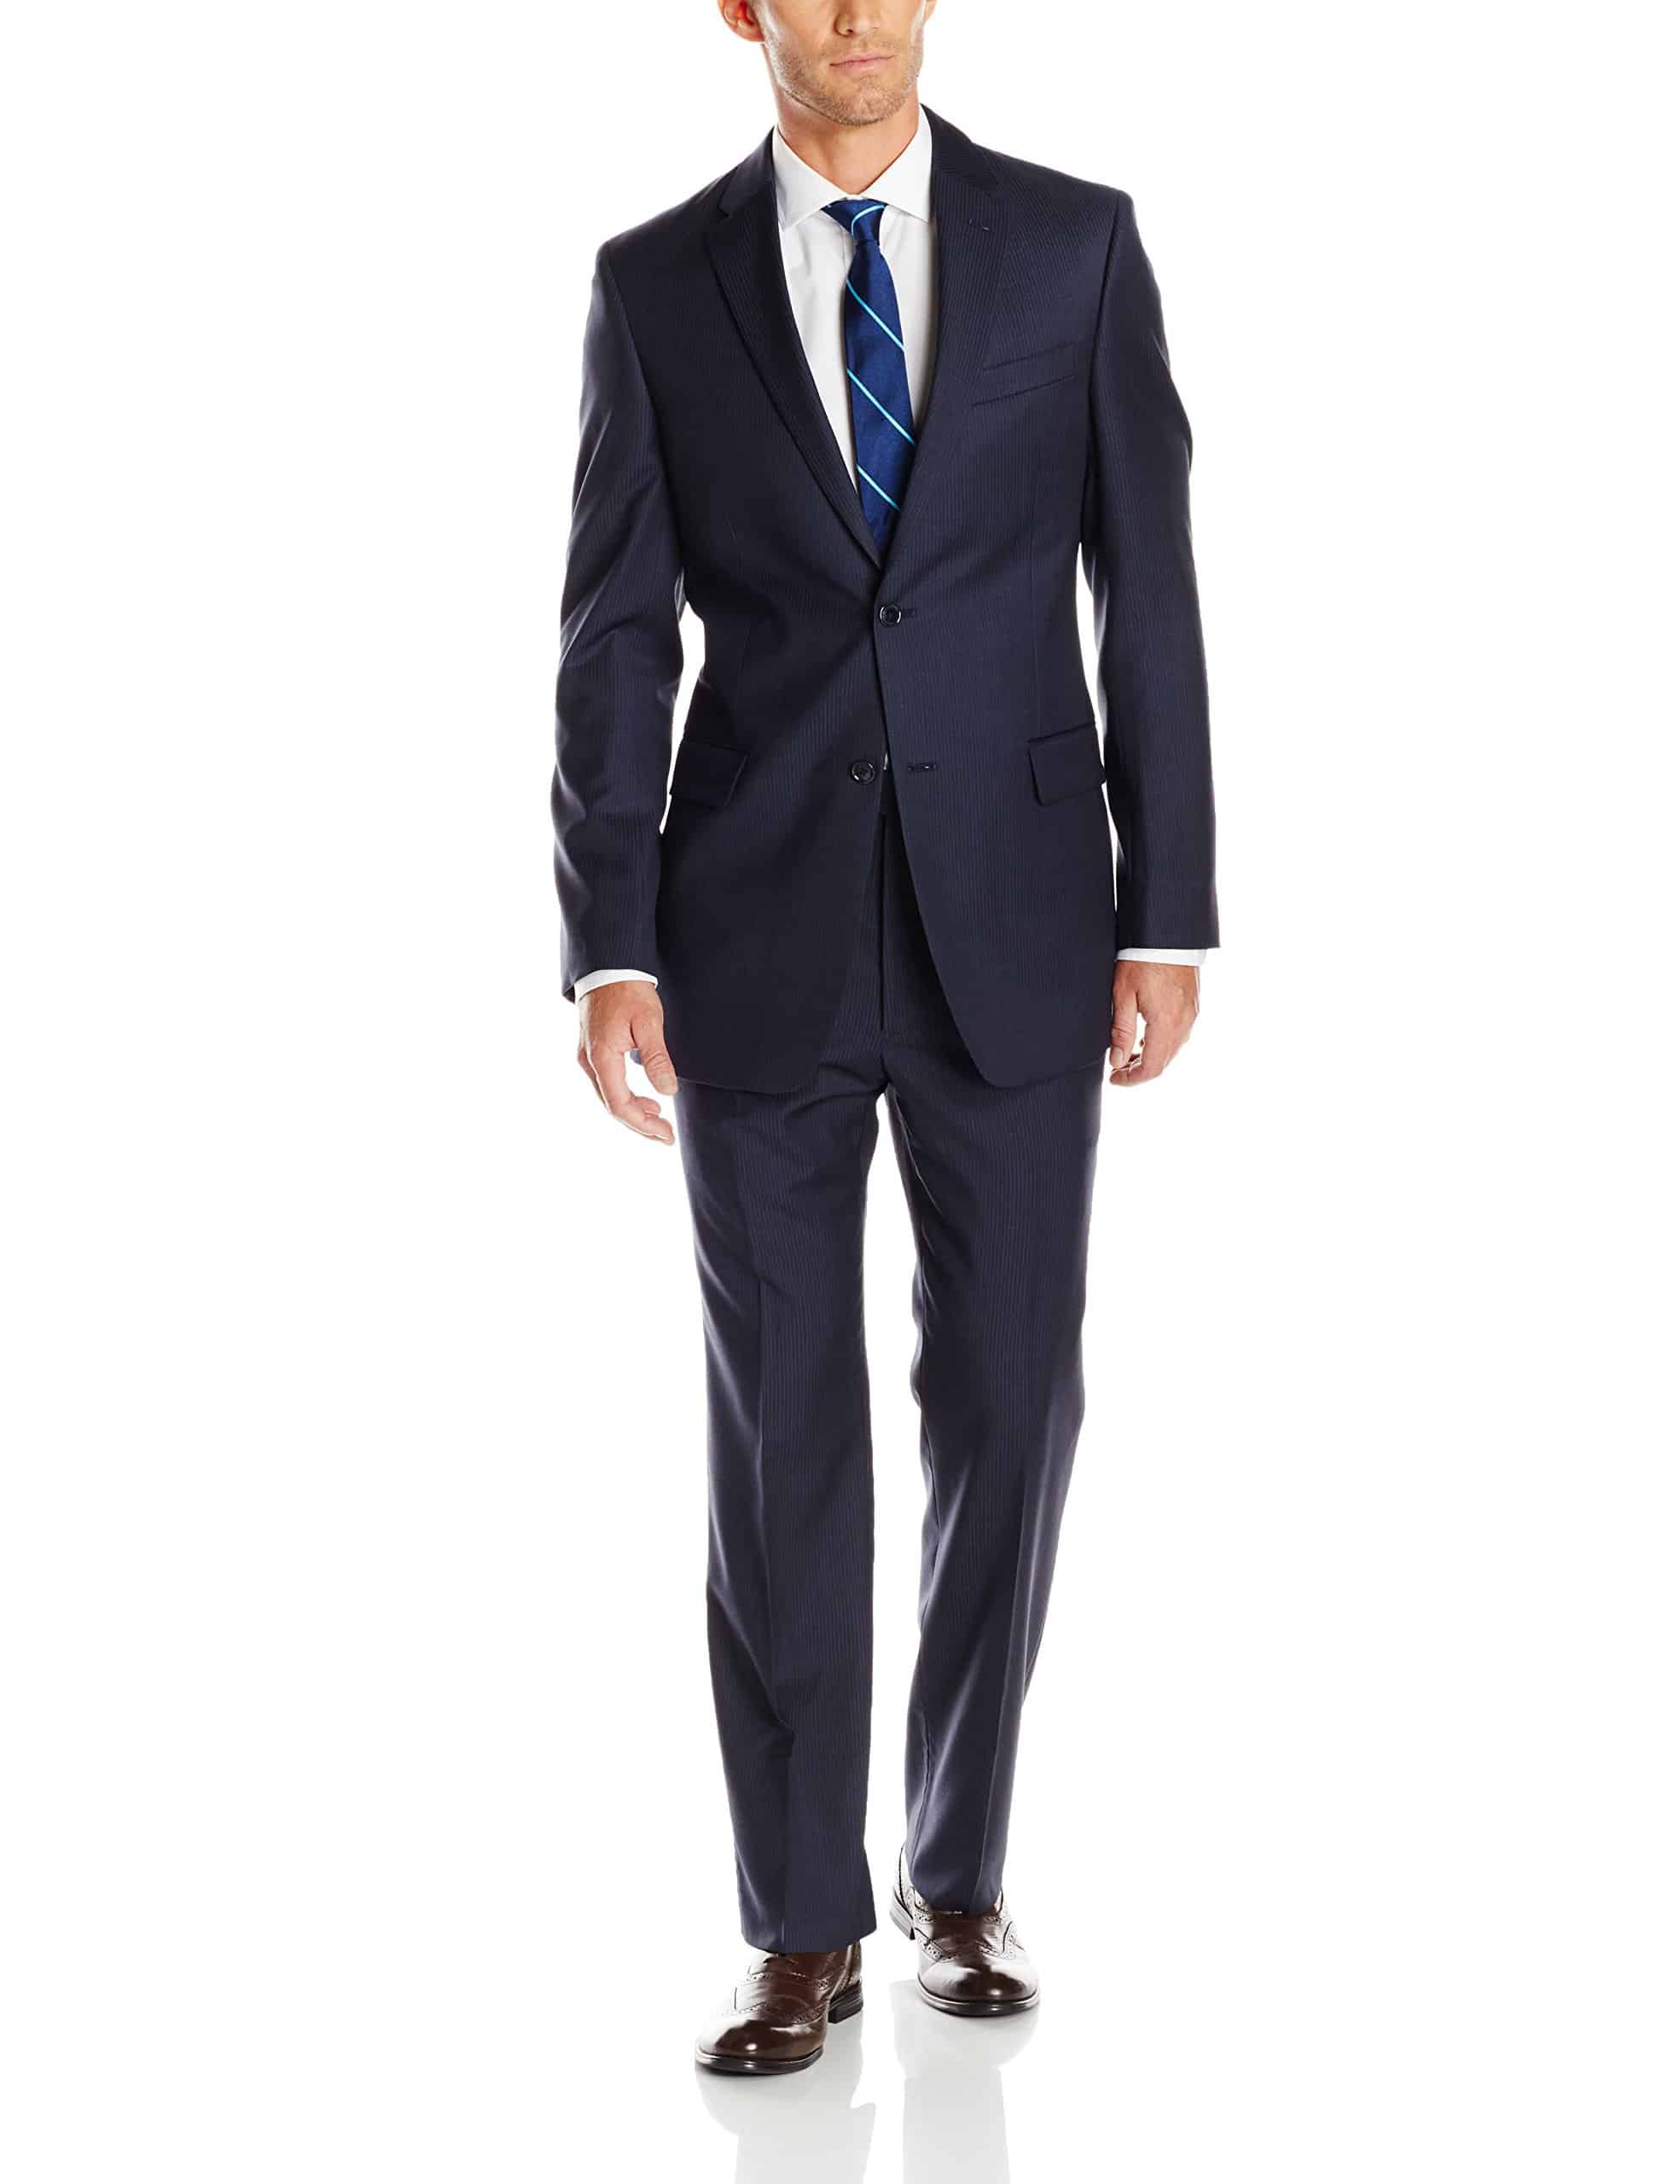 Top Brands for Mens Suits